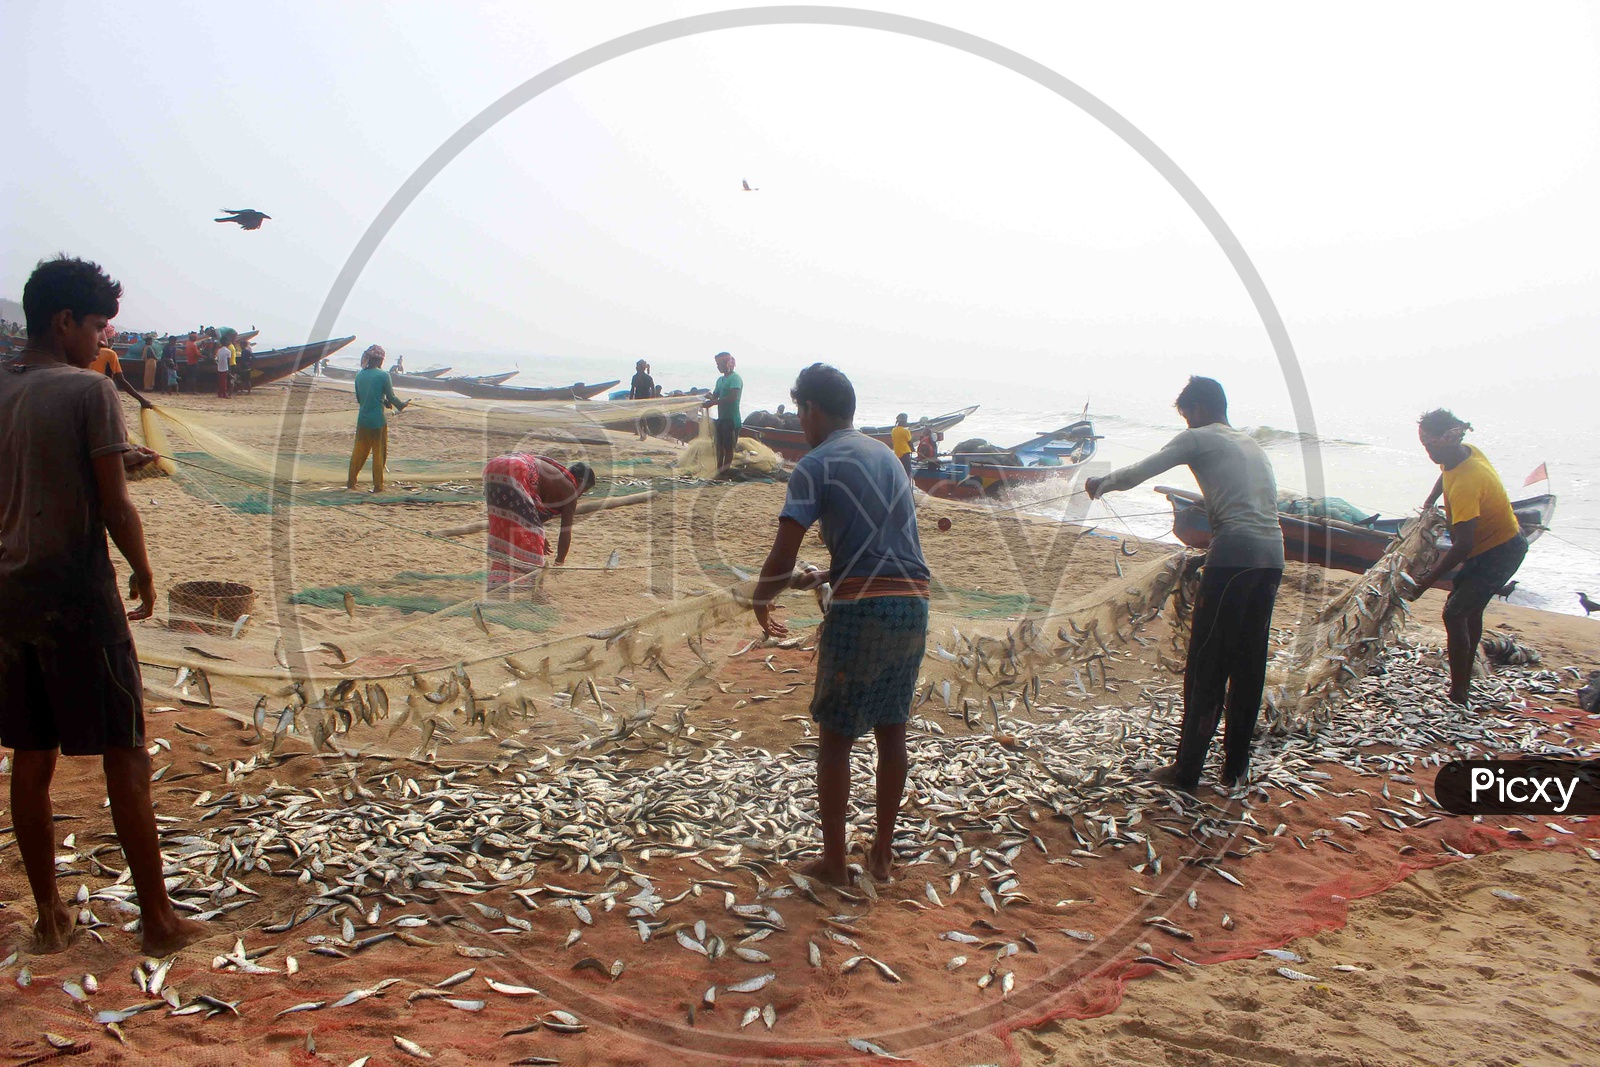 Fishermen spreading out freshly caught fish to dry on blue net in the beach